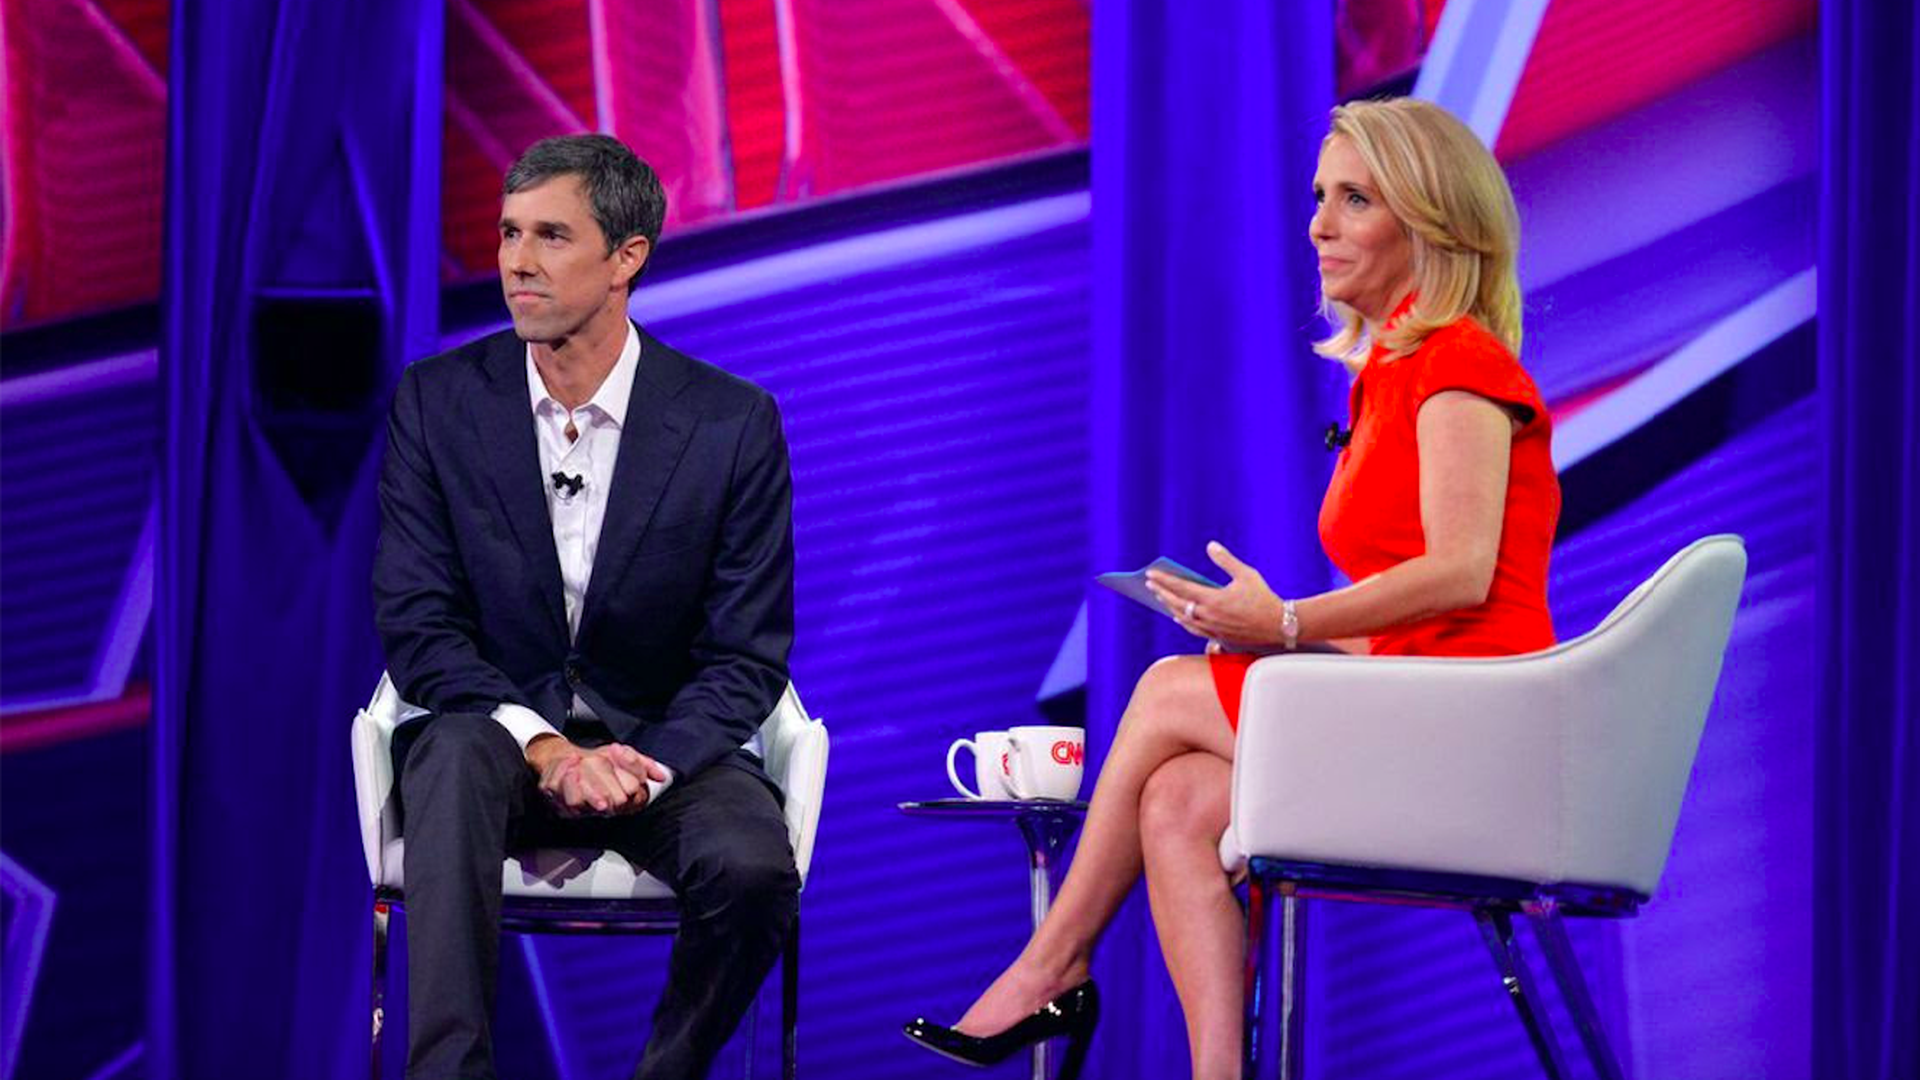 CNN's Dash Bash on stage during a town hall with Texas Senate Democratic candidate Beto O'Rourke.